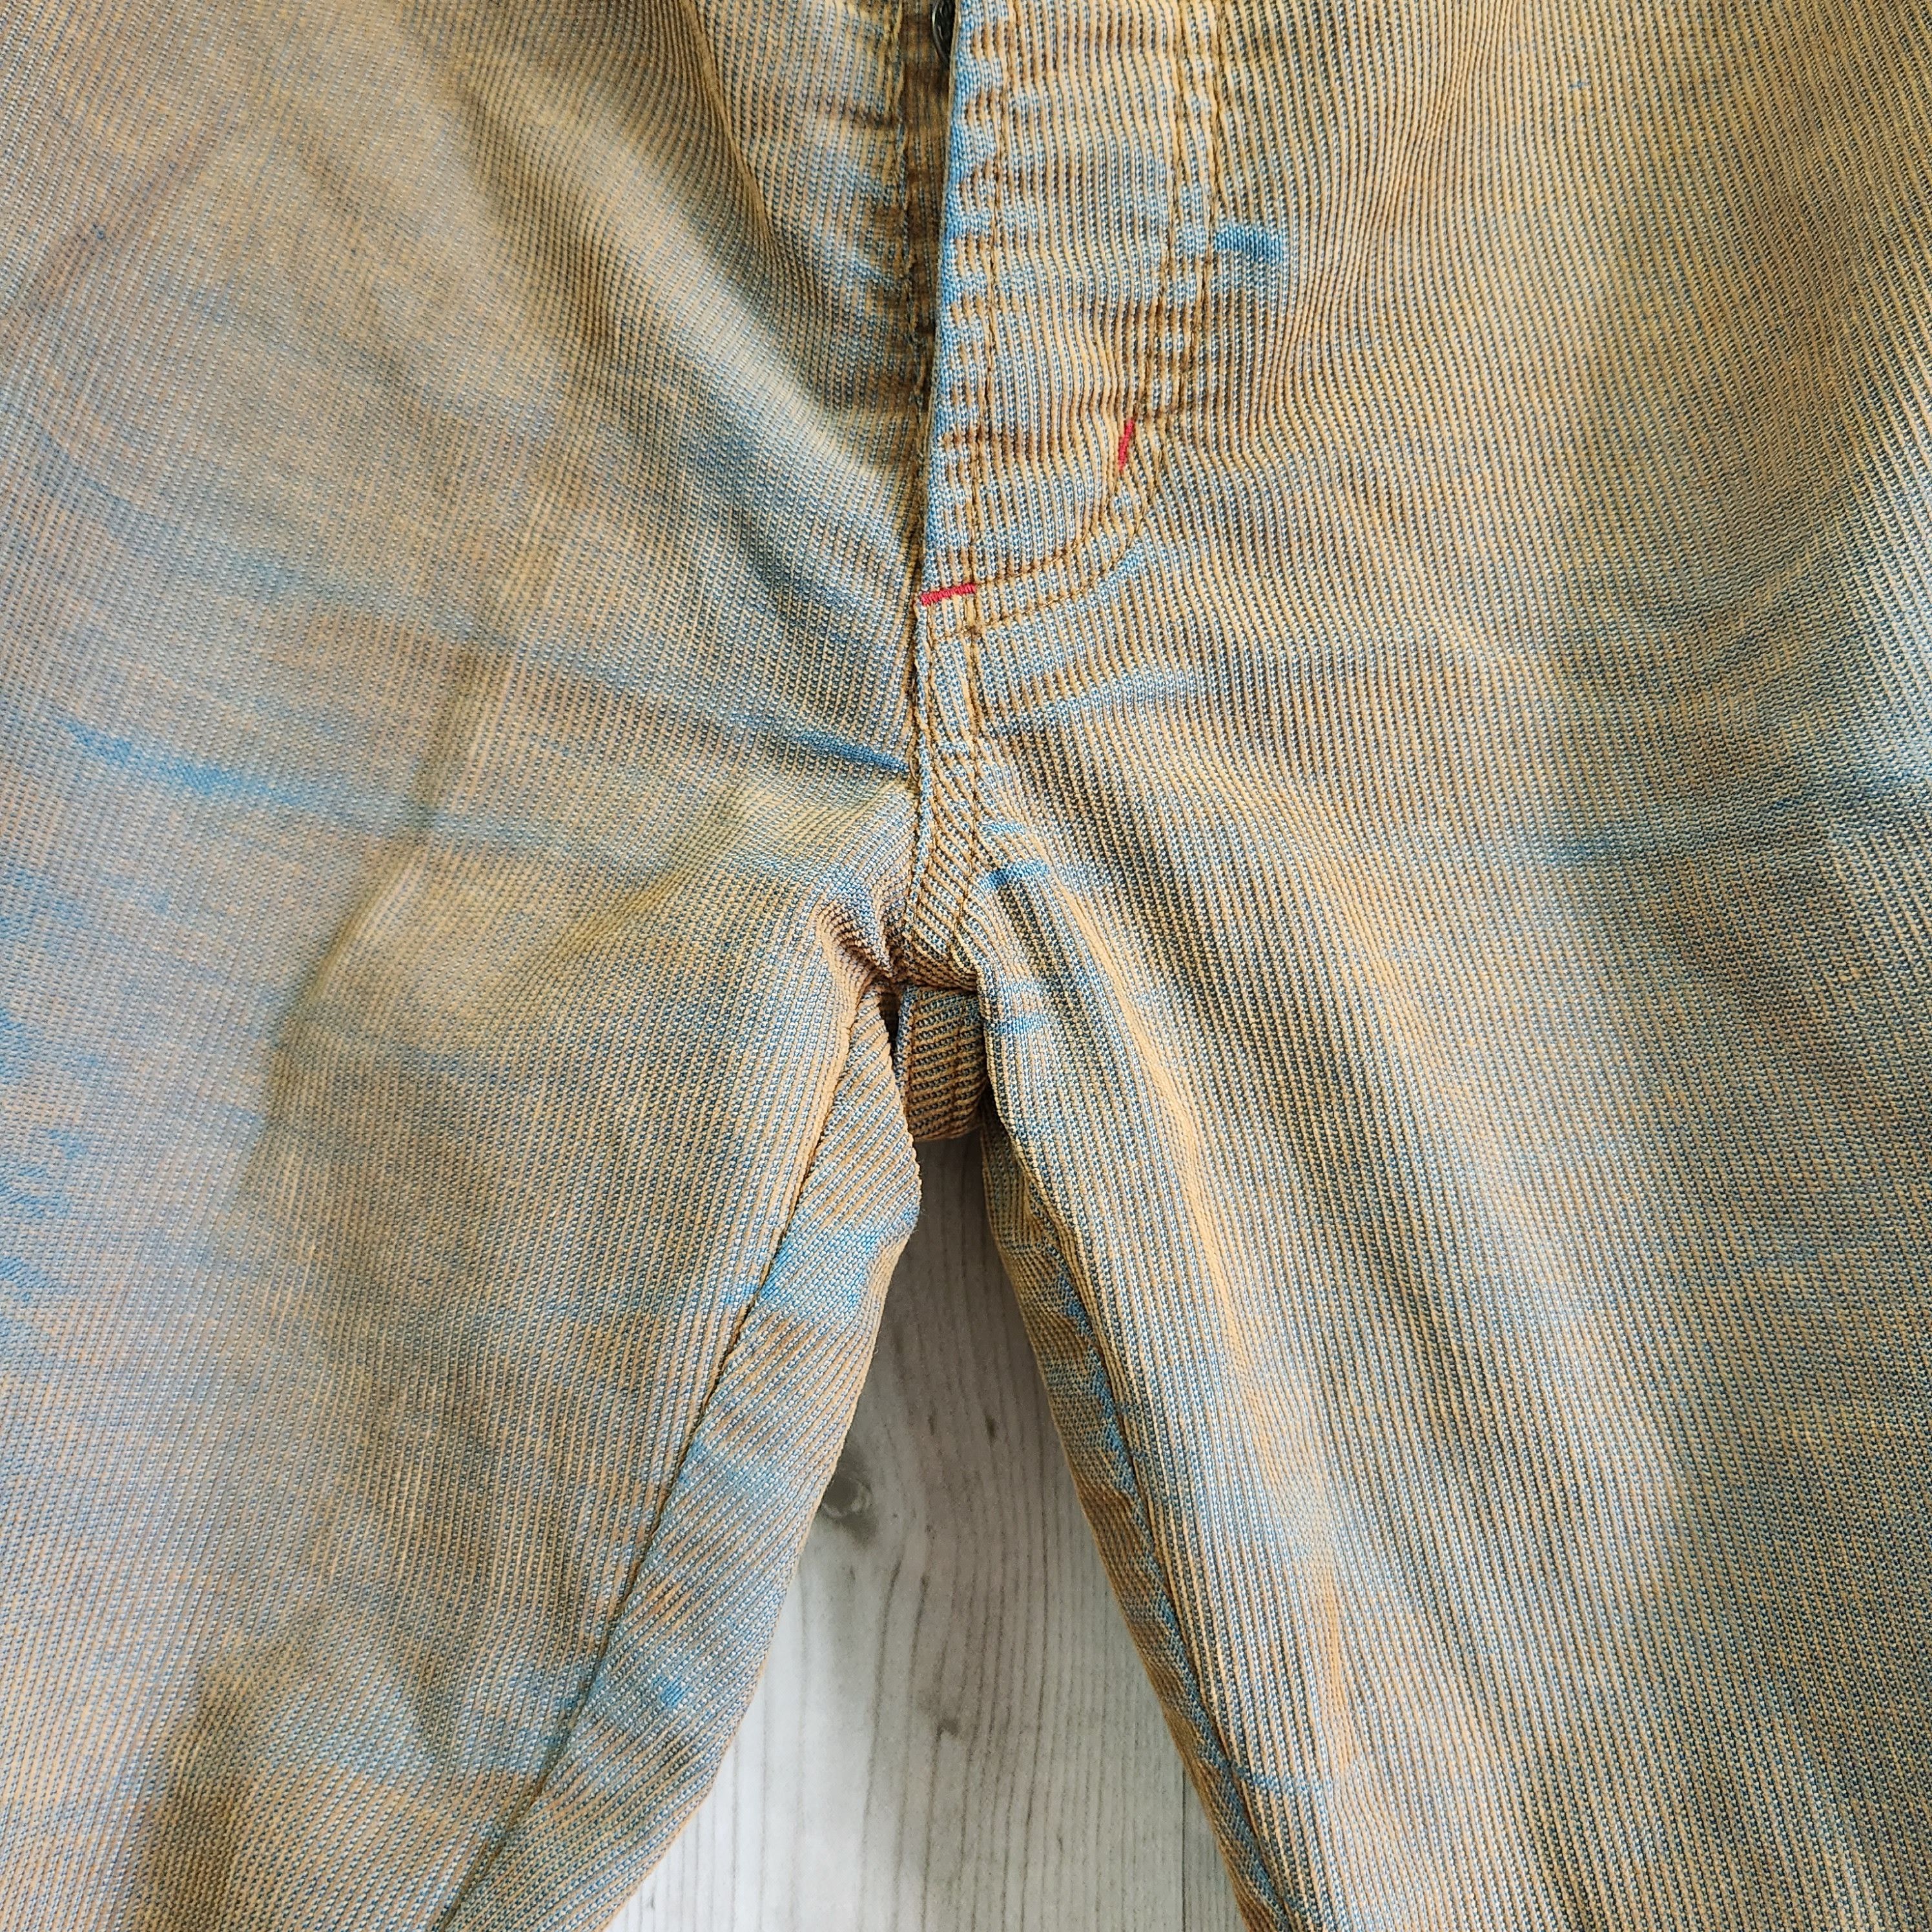 Key Acquisitions - Acquiesce Distressed Faded Bluish Denim Jeans Japanese - 3